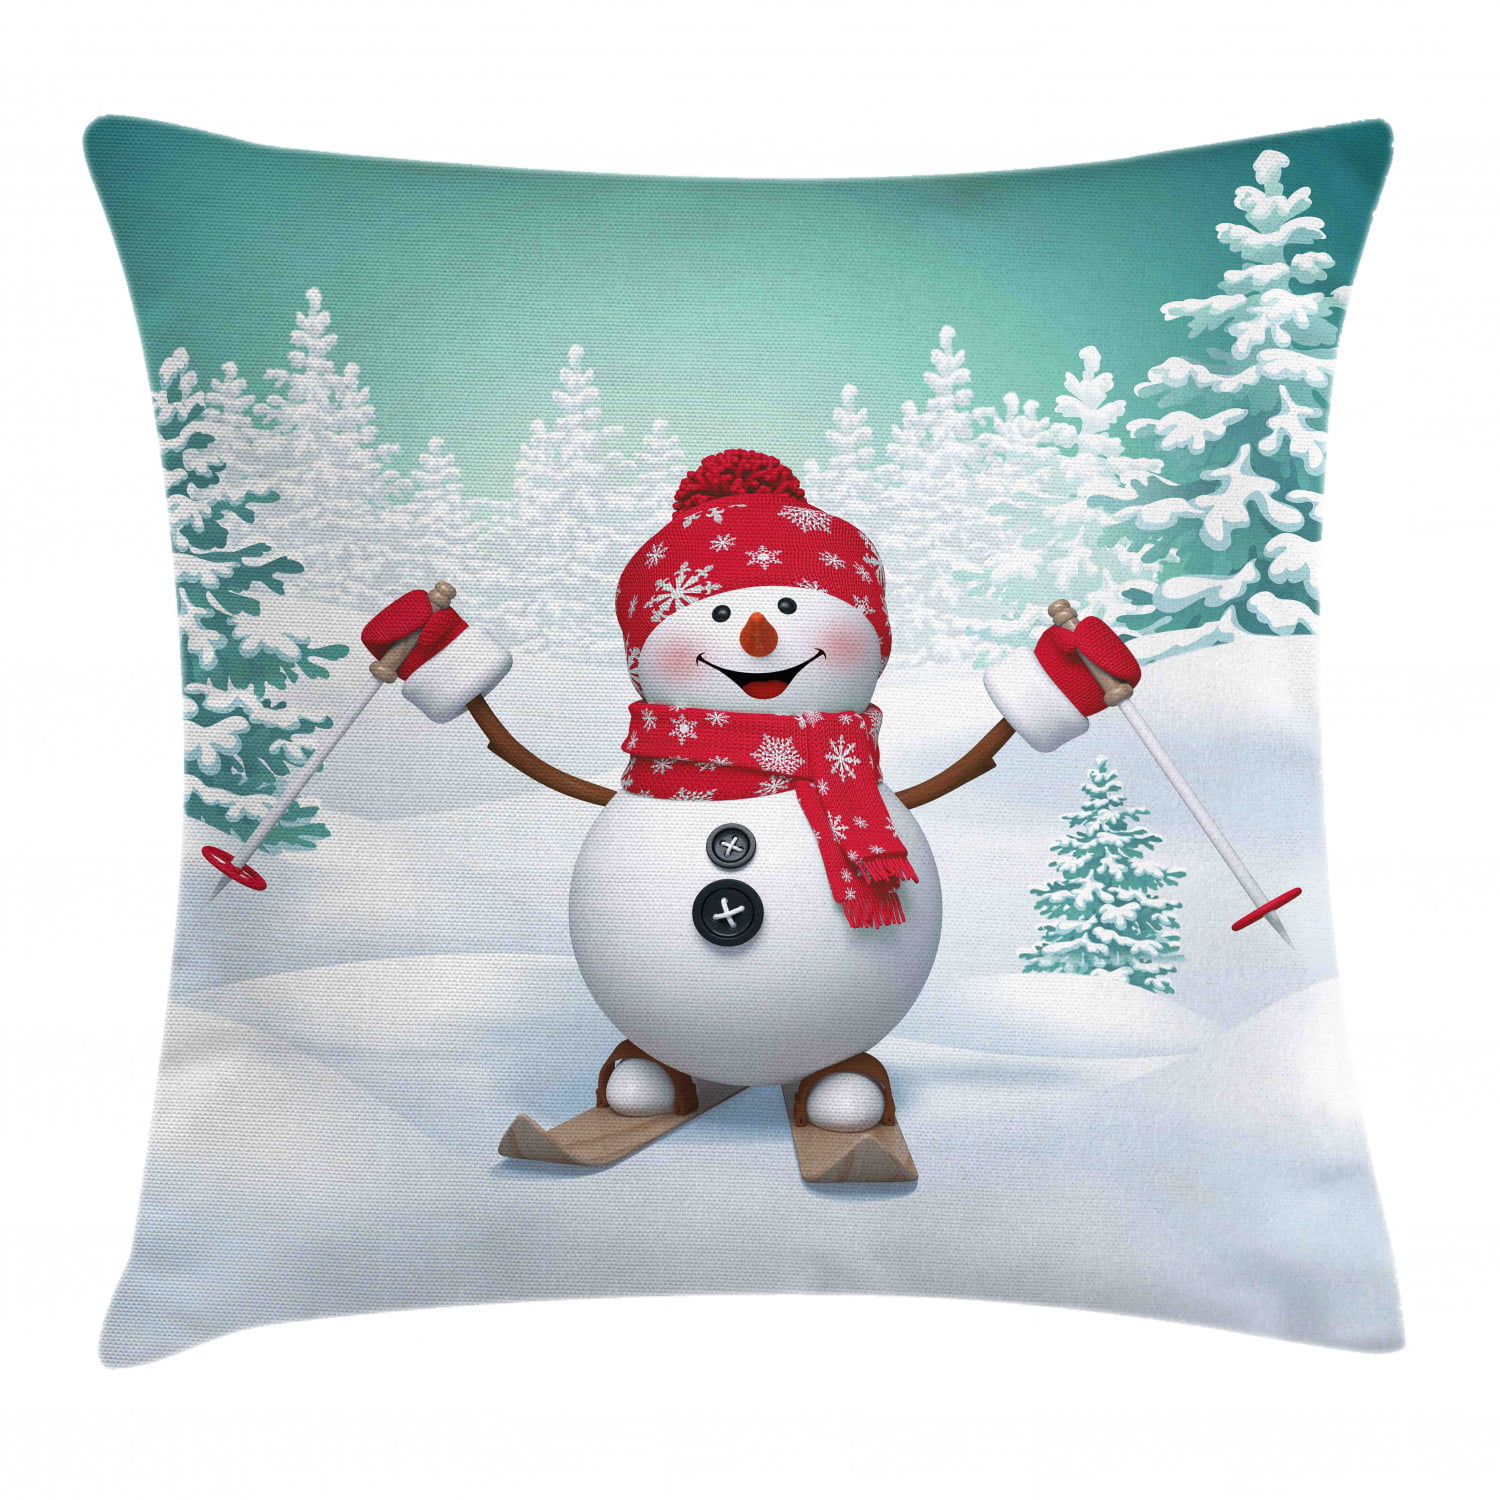 Christmas Throw Pillow Cushion Cover, Snow Covered Mountain with Fir Trees and Skiing Snowman